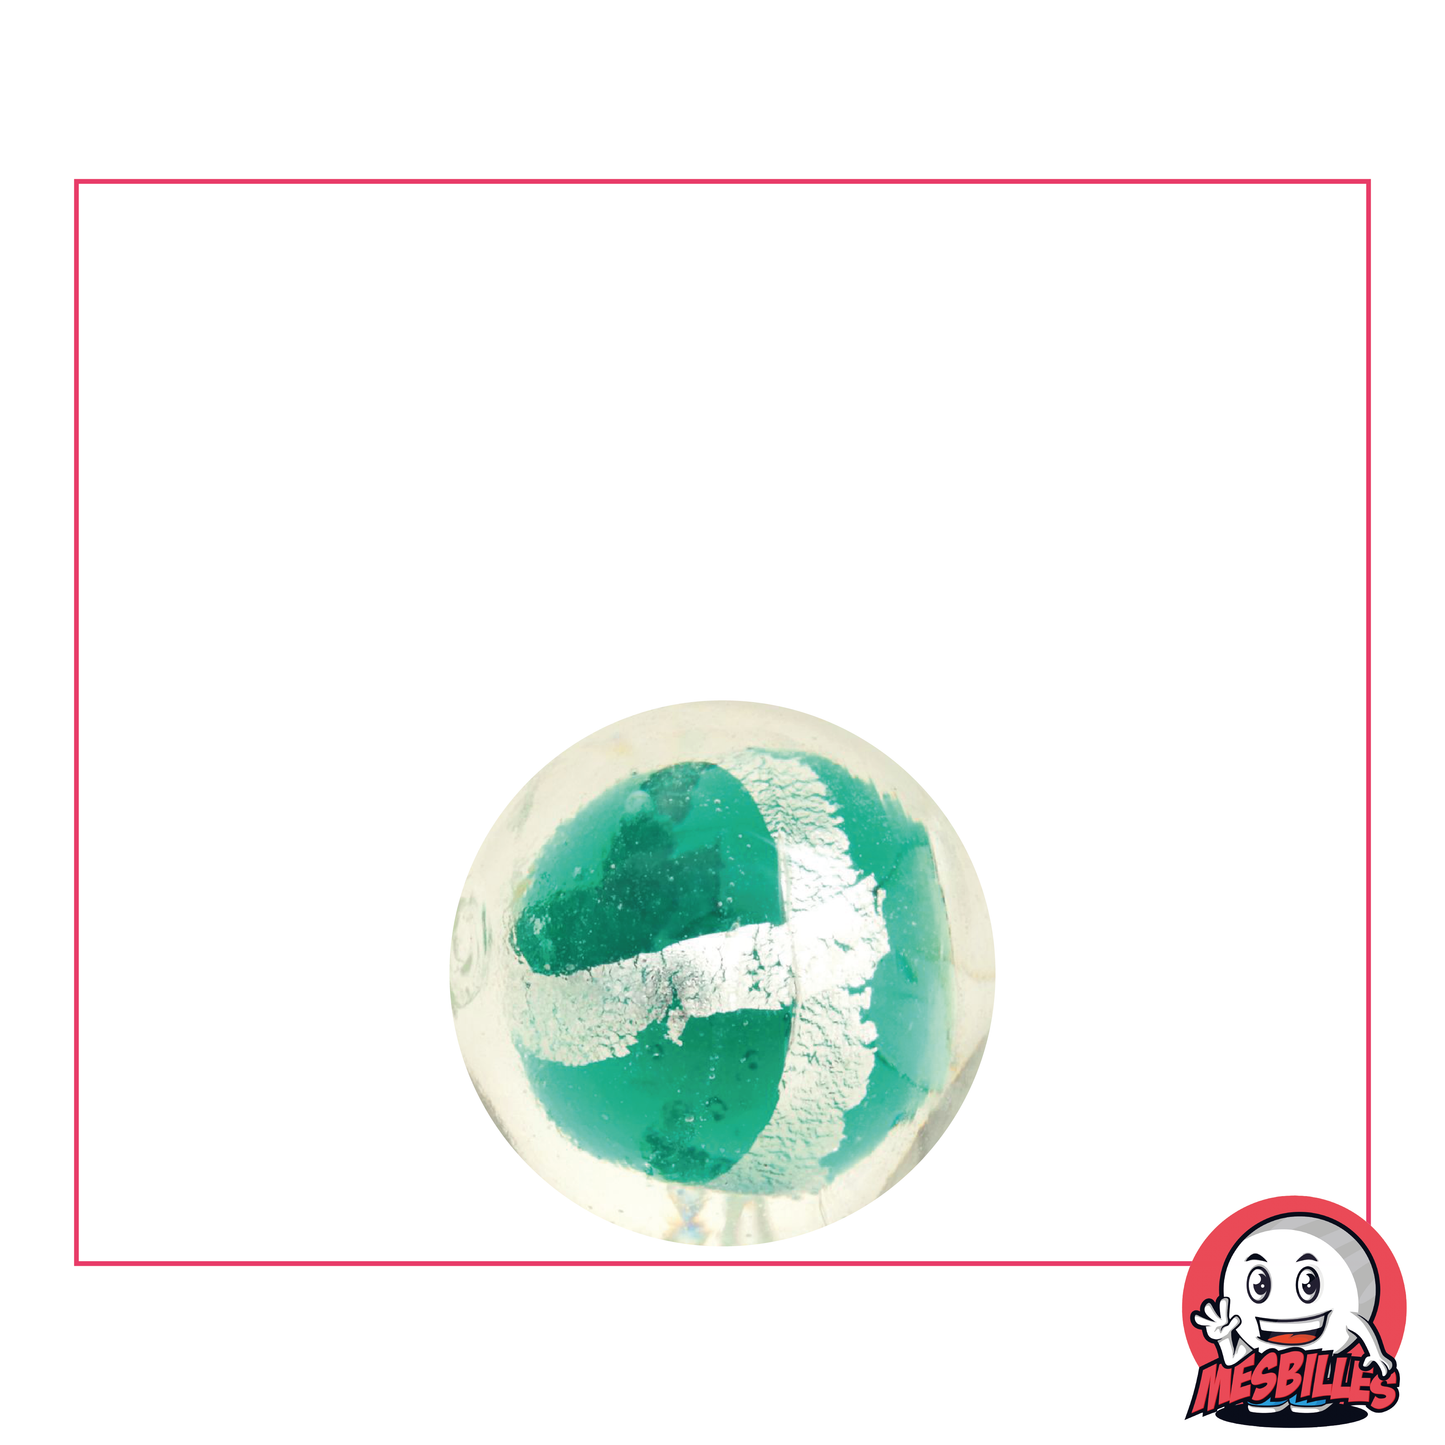 1 Art Cage Marble Light Green 16 mm